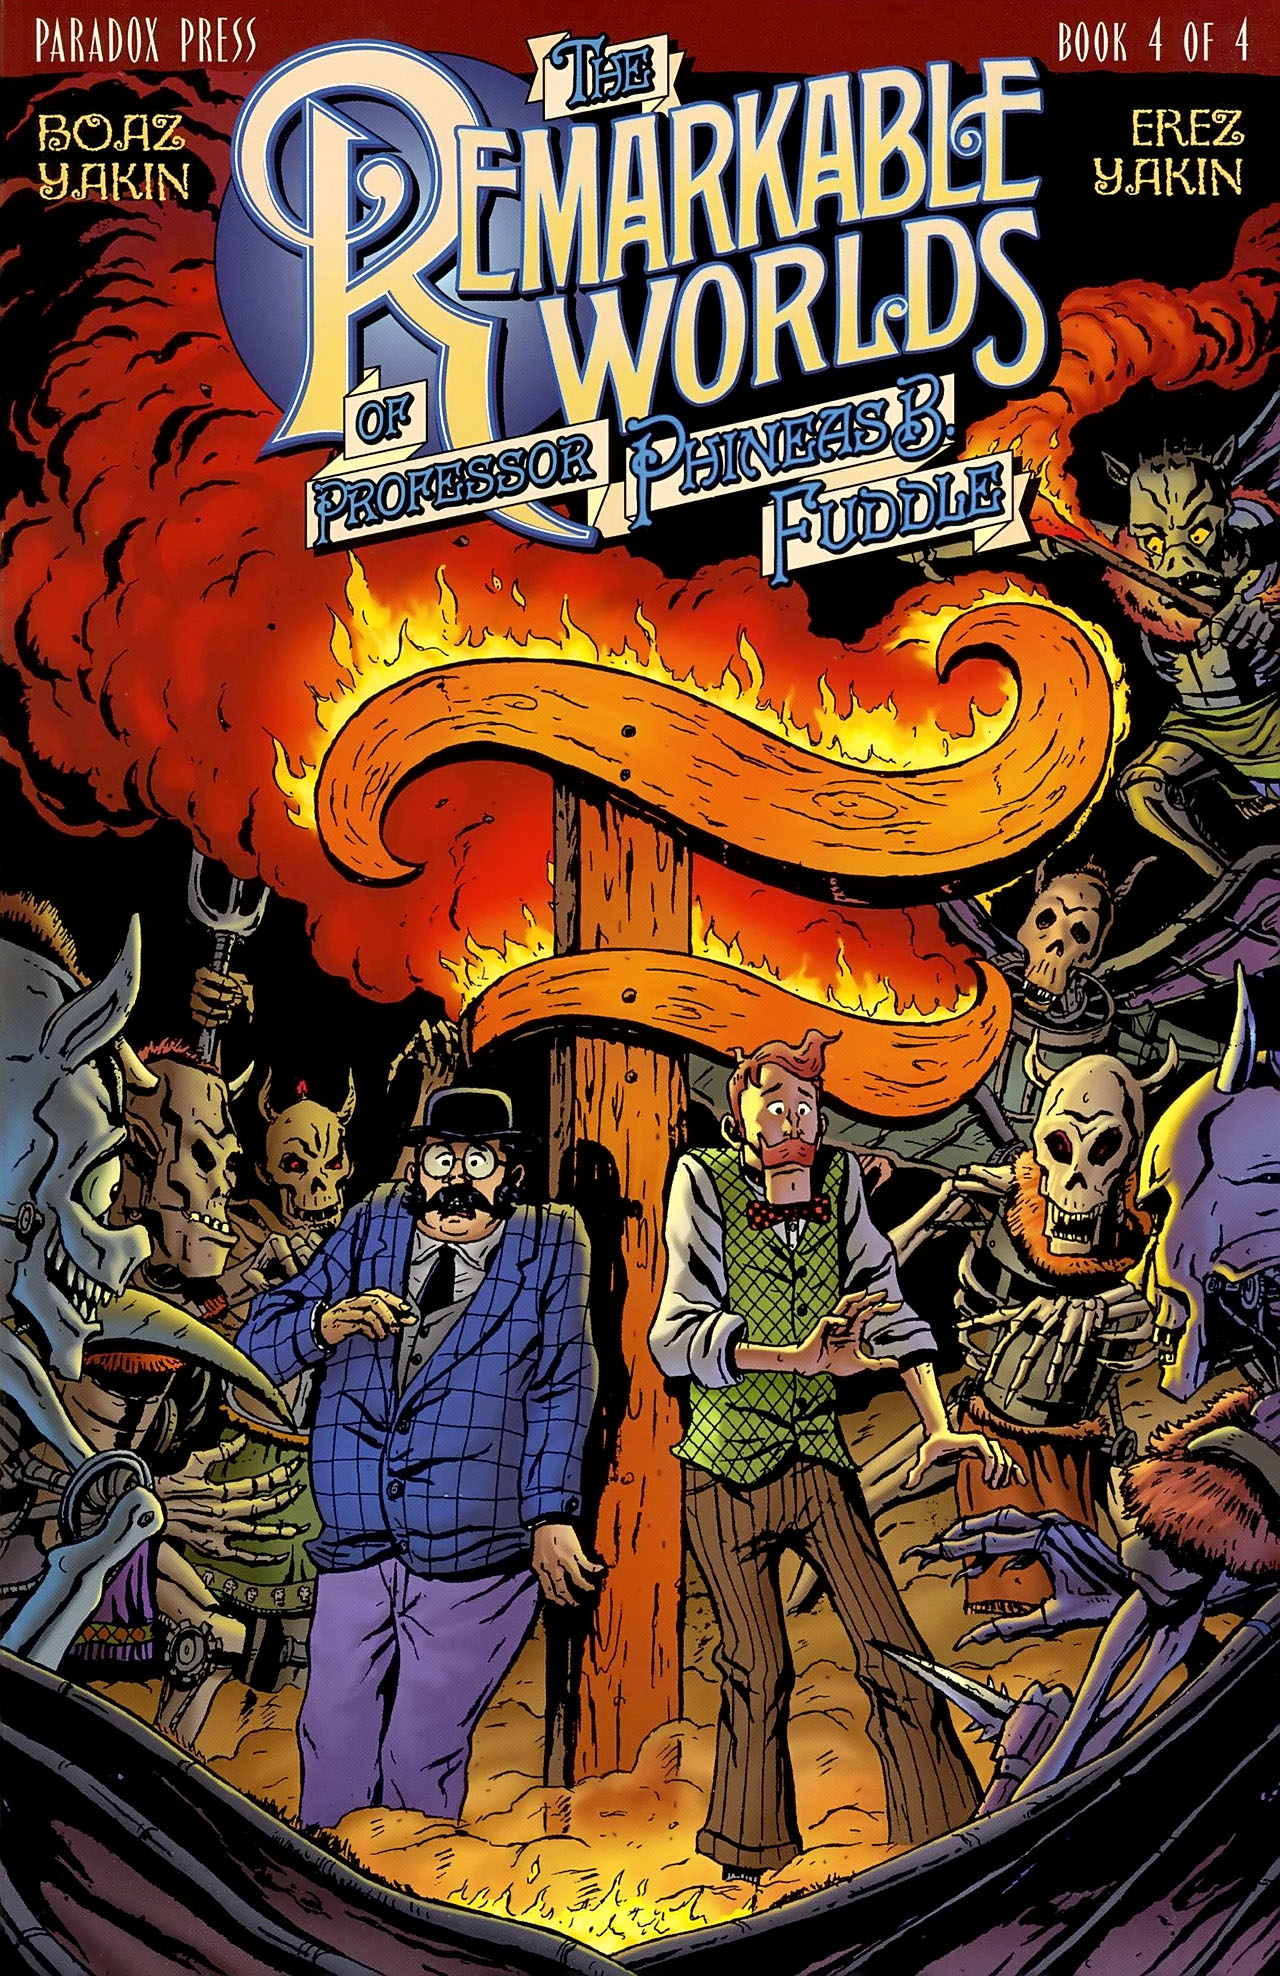 Read online The Remarkable Worlds of Professor Phineas B. Fuddle comic -  Issue #4 - 1